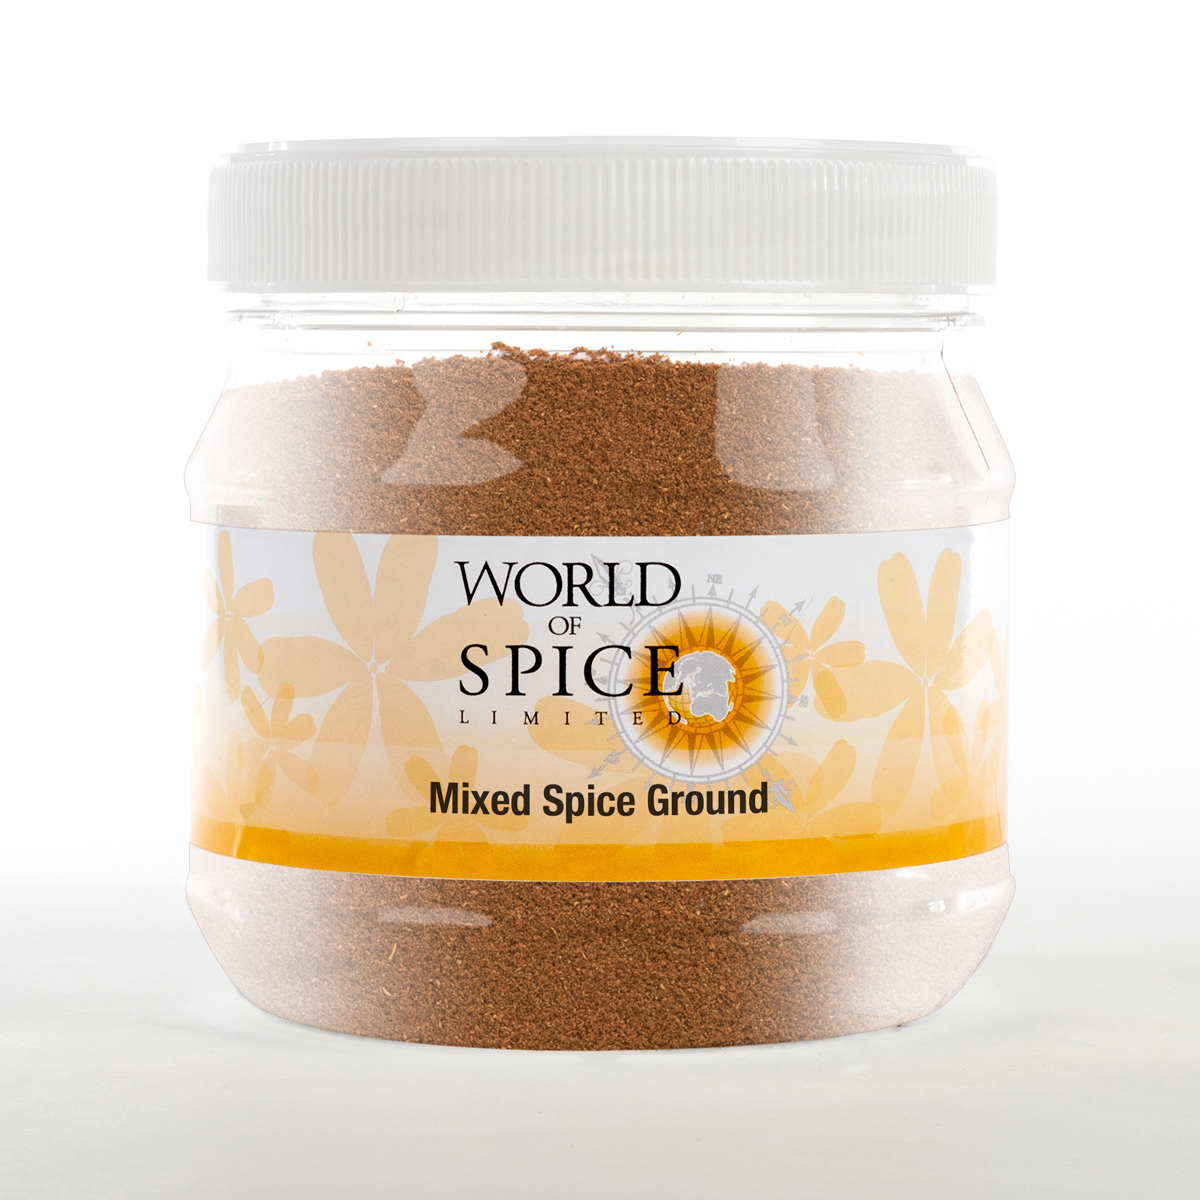 Online Spice Companies - Tub of Mixed Spice Ground